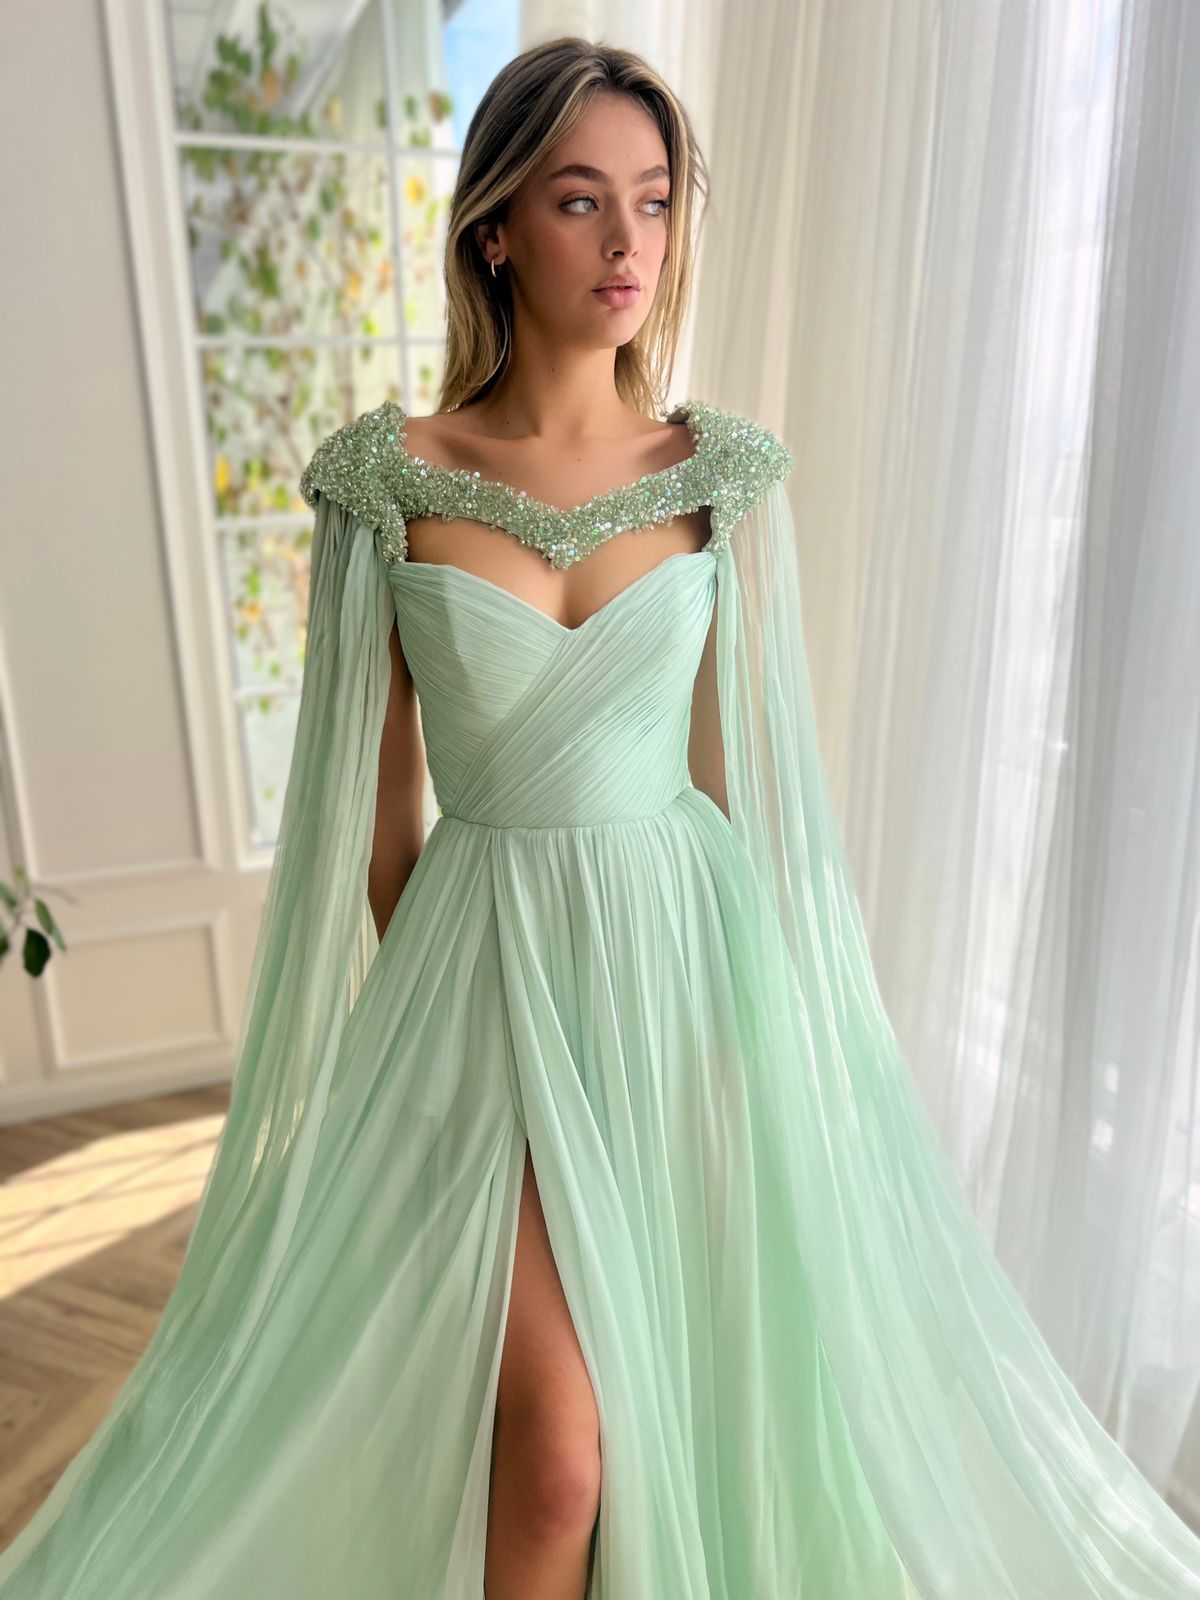 Green A-Line dress with cape and embroidery